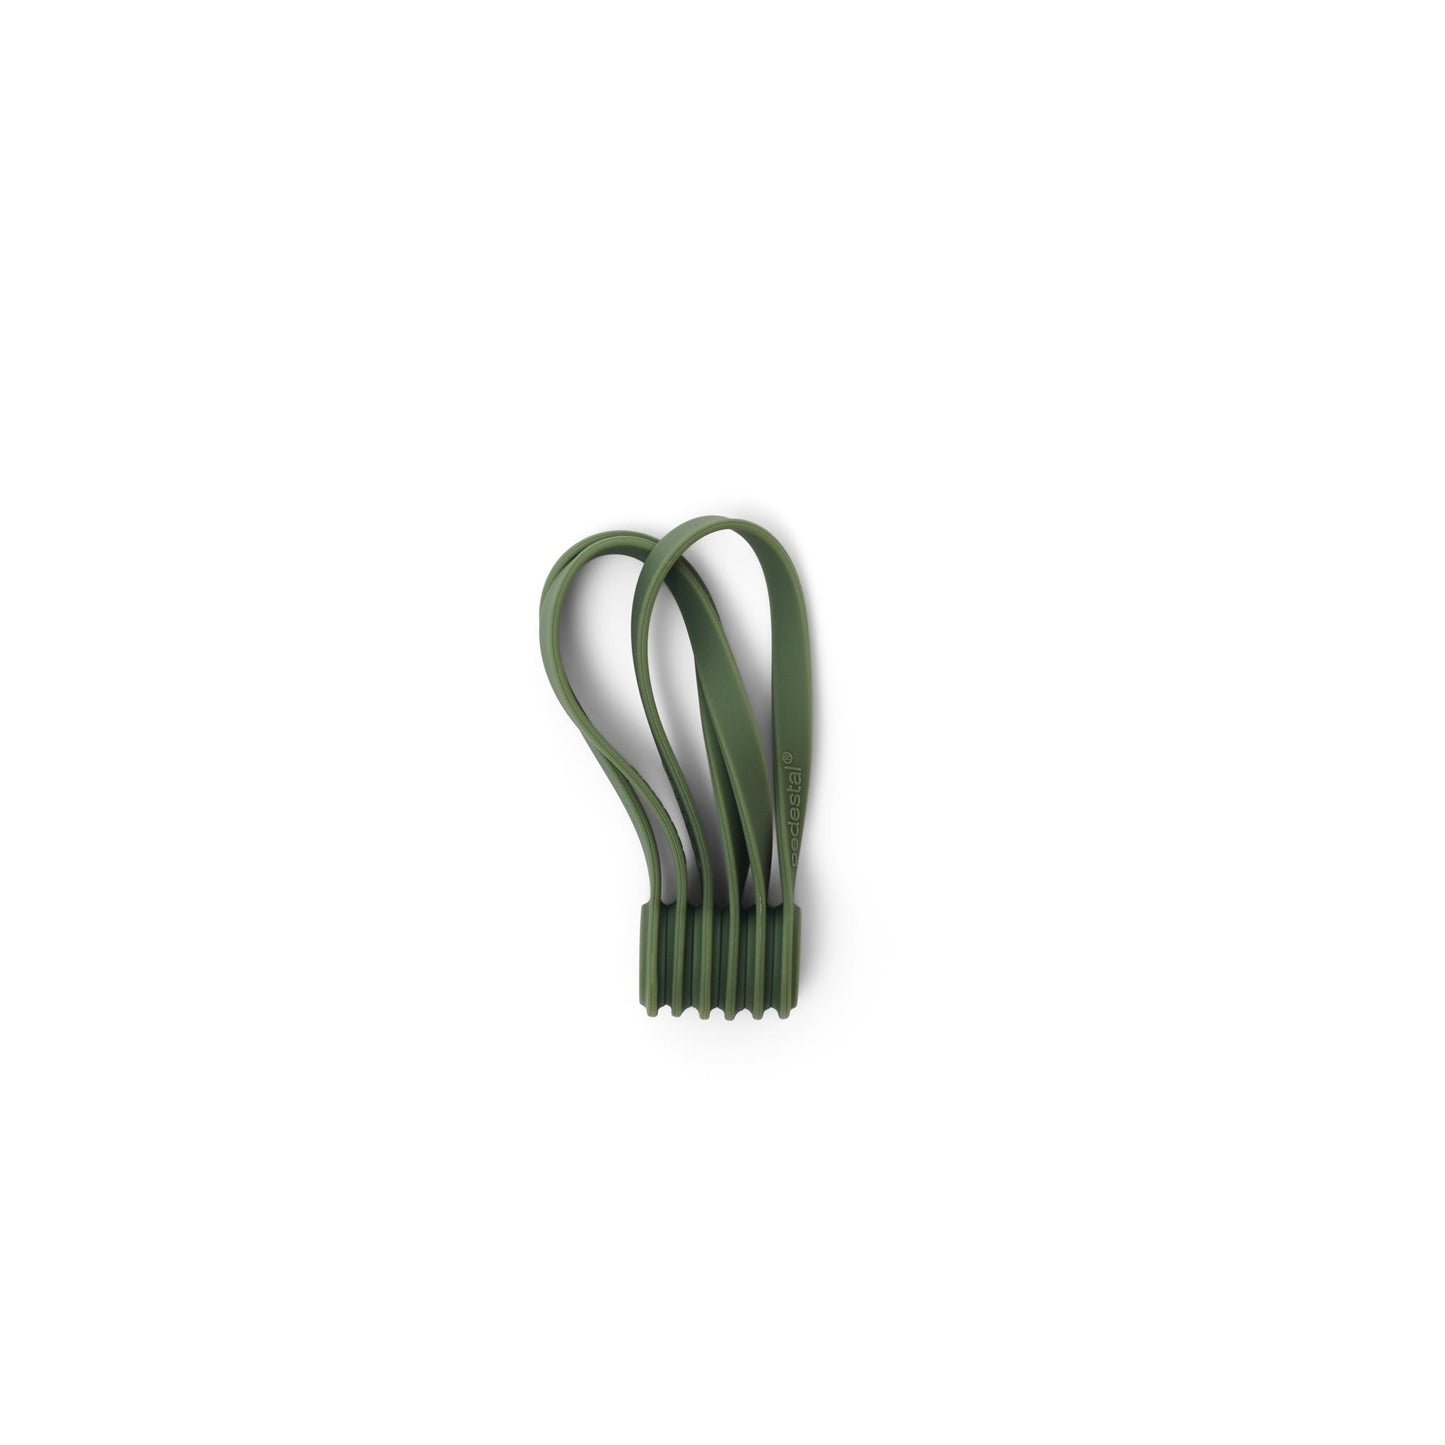 Cable Tie Magnetic by Pedestal #Mossy Green